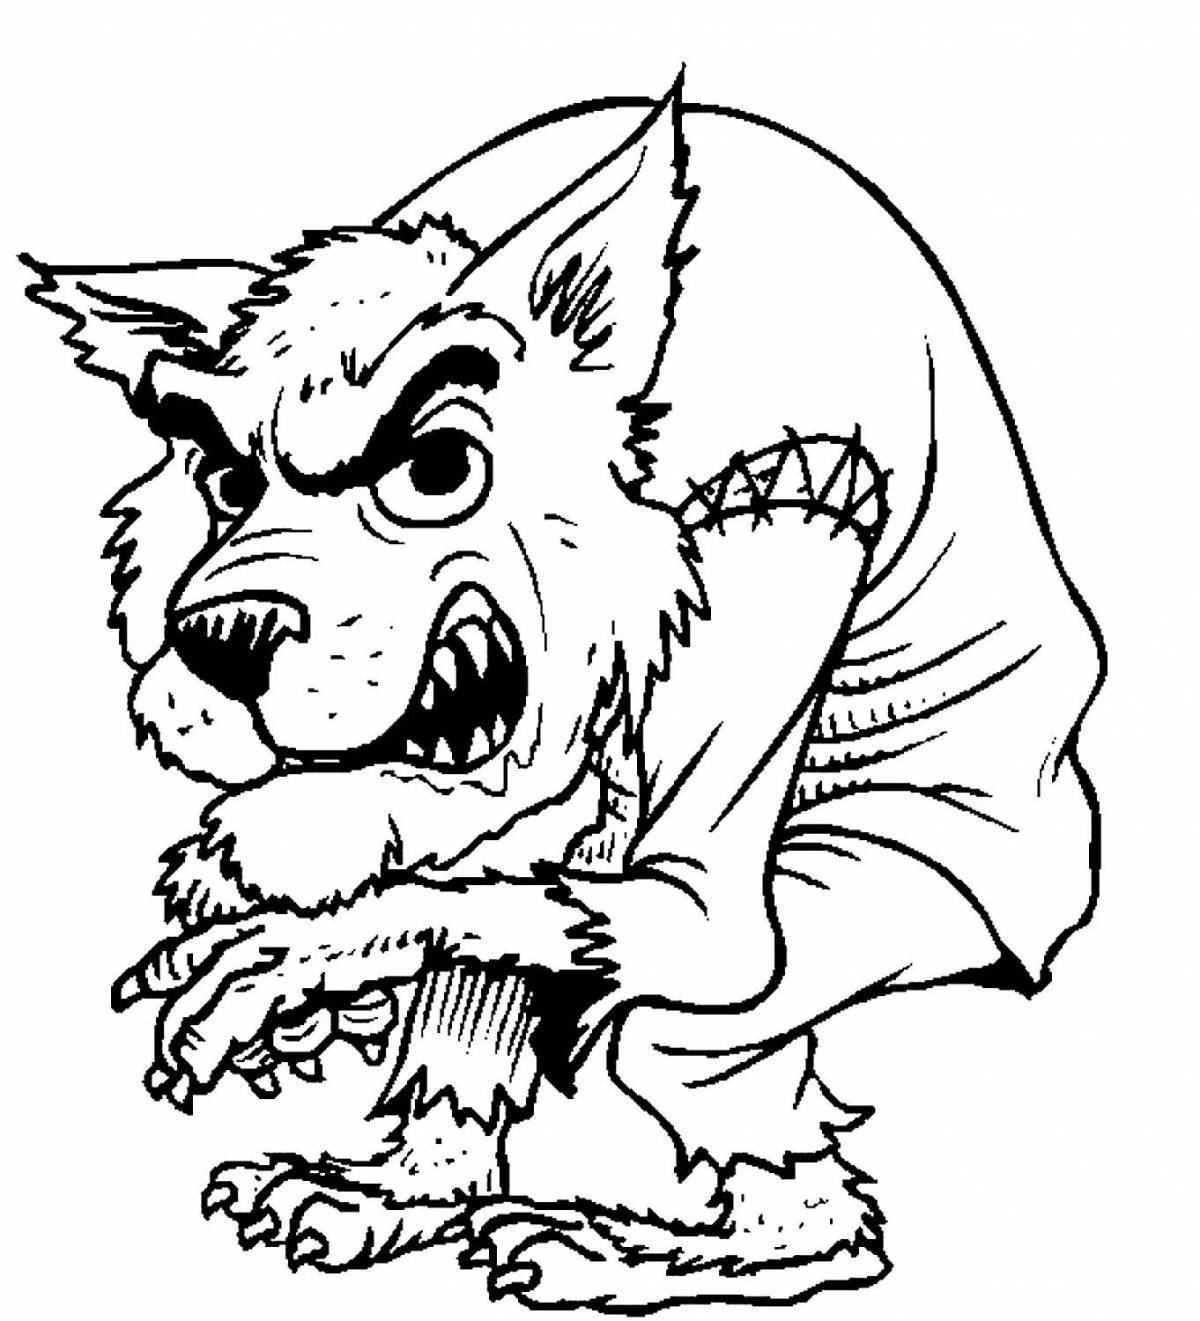 Sinister werewolf coloring book